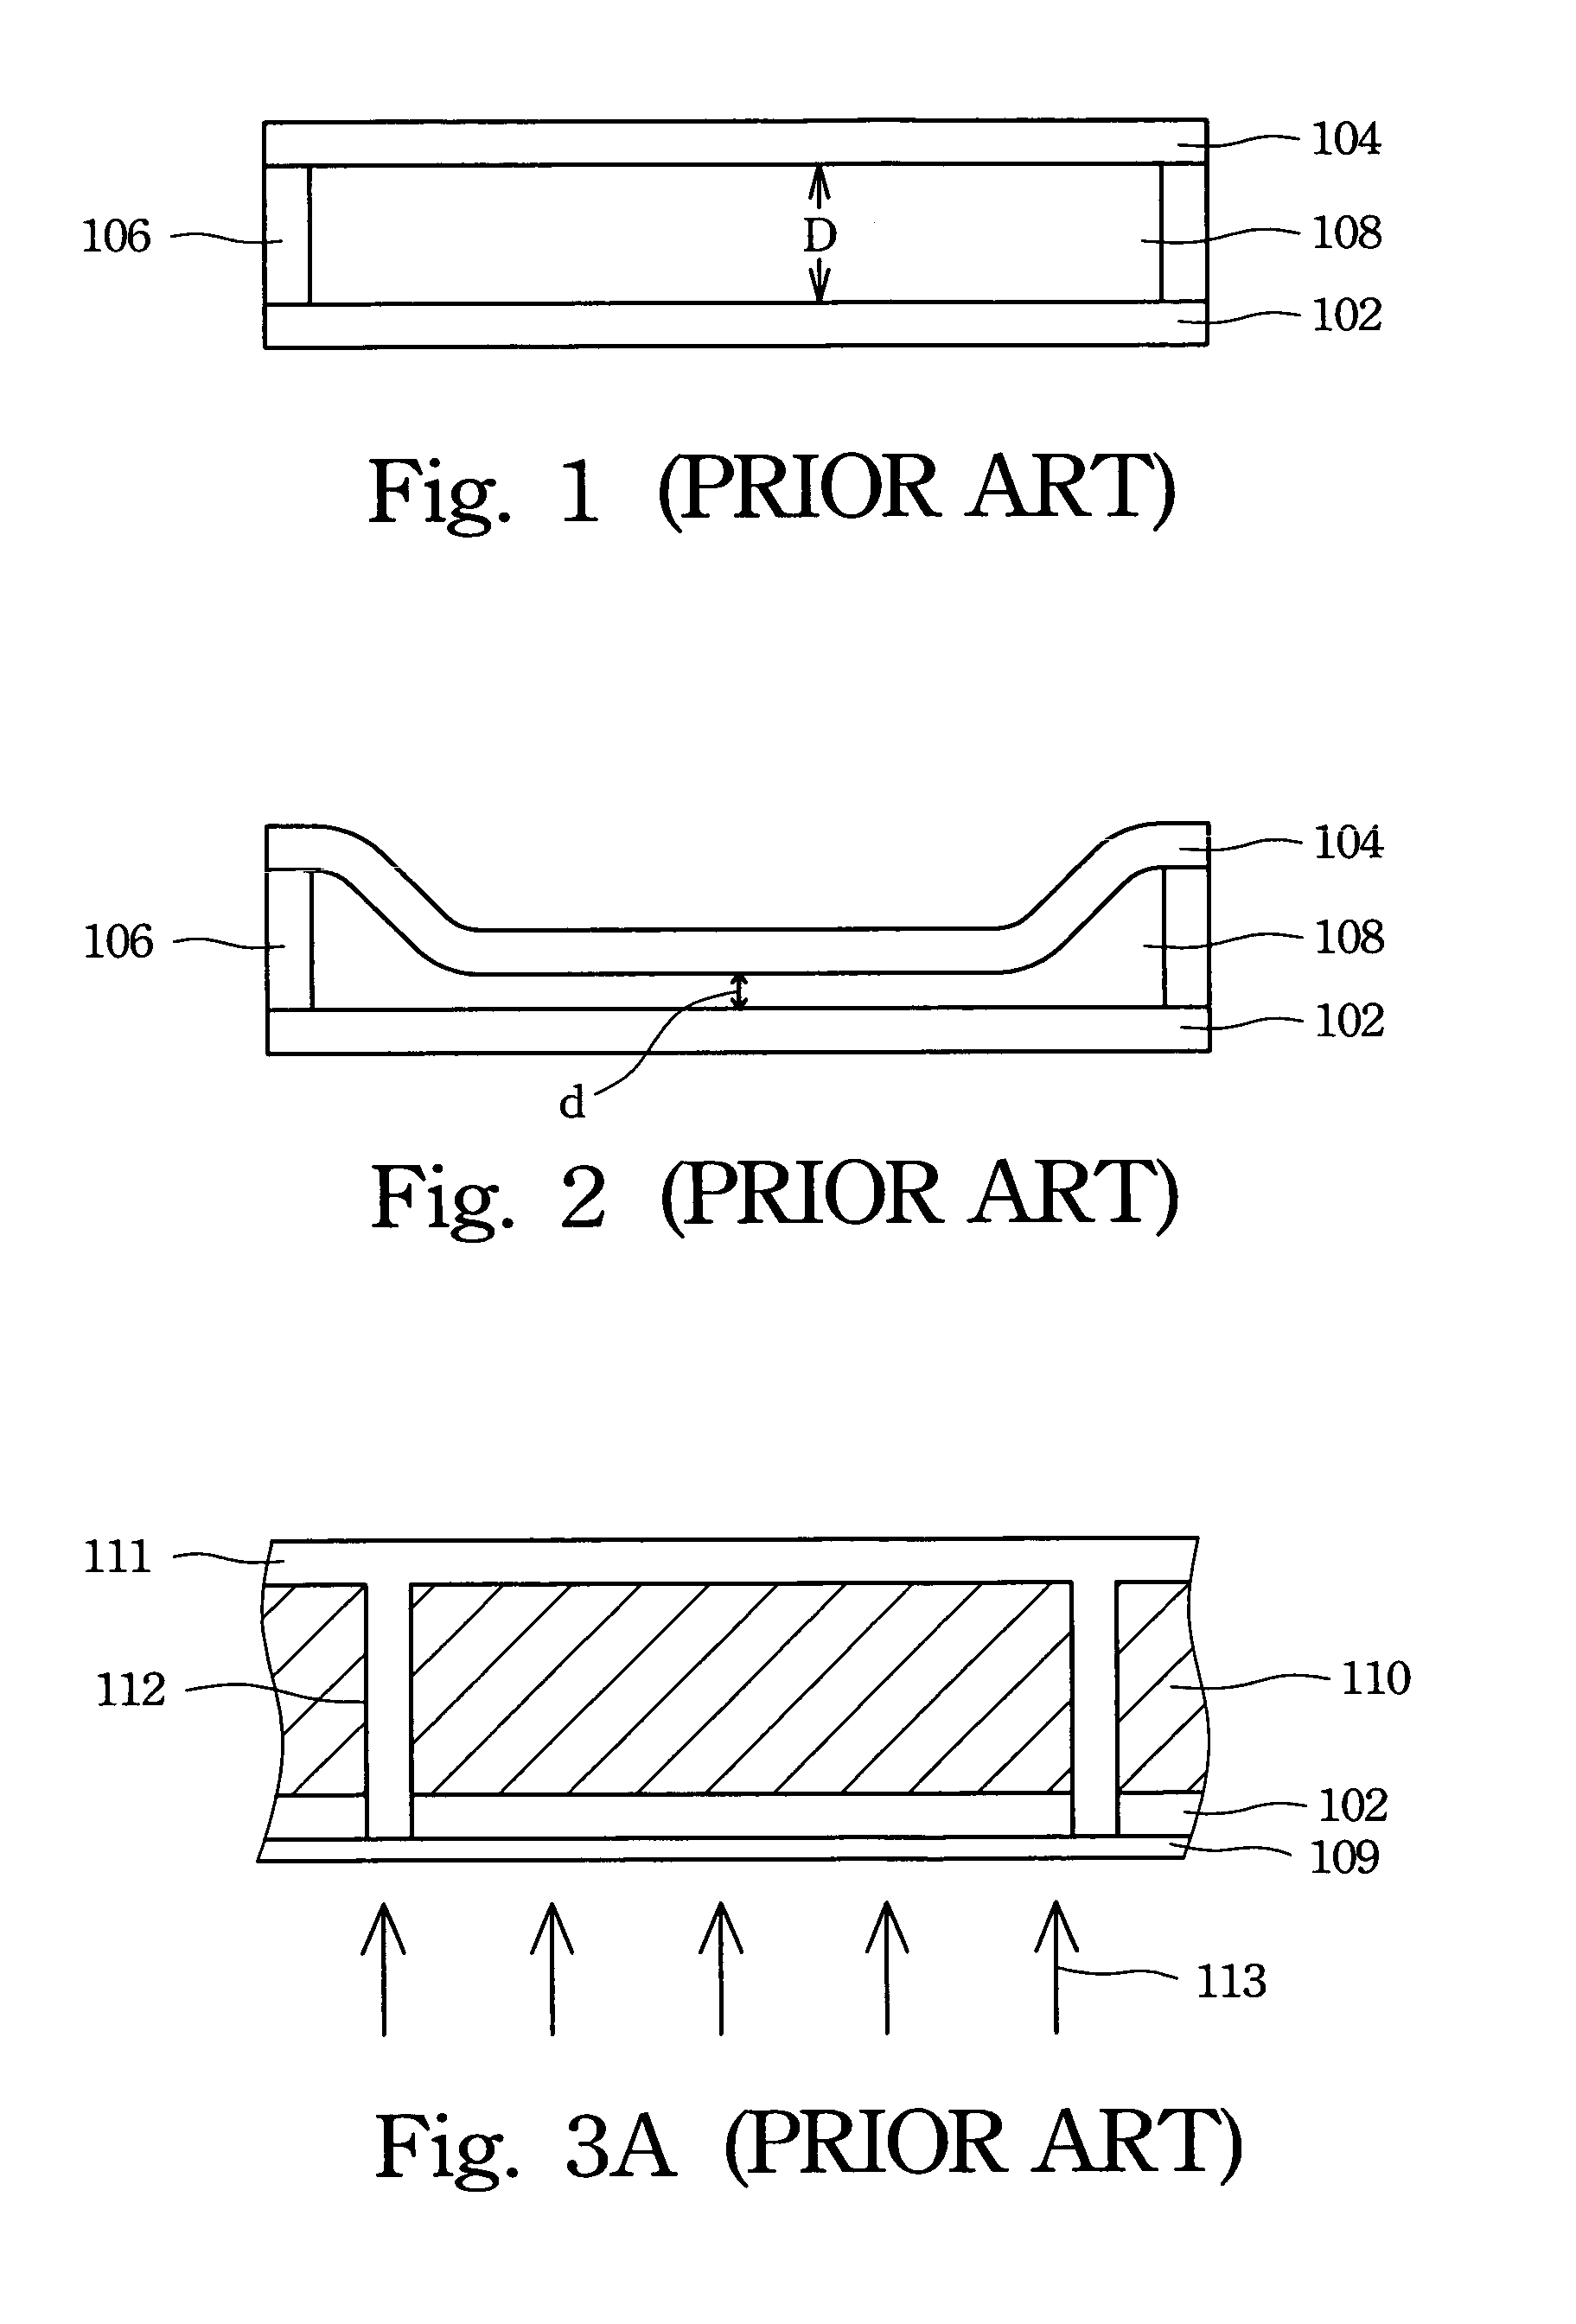 Interference display unit